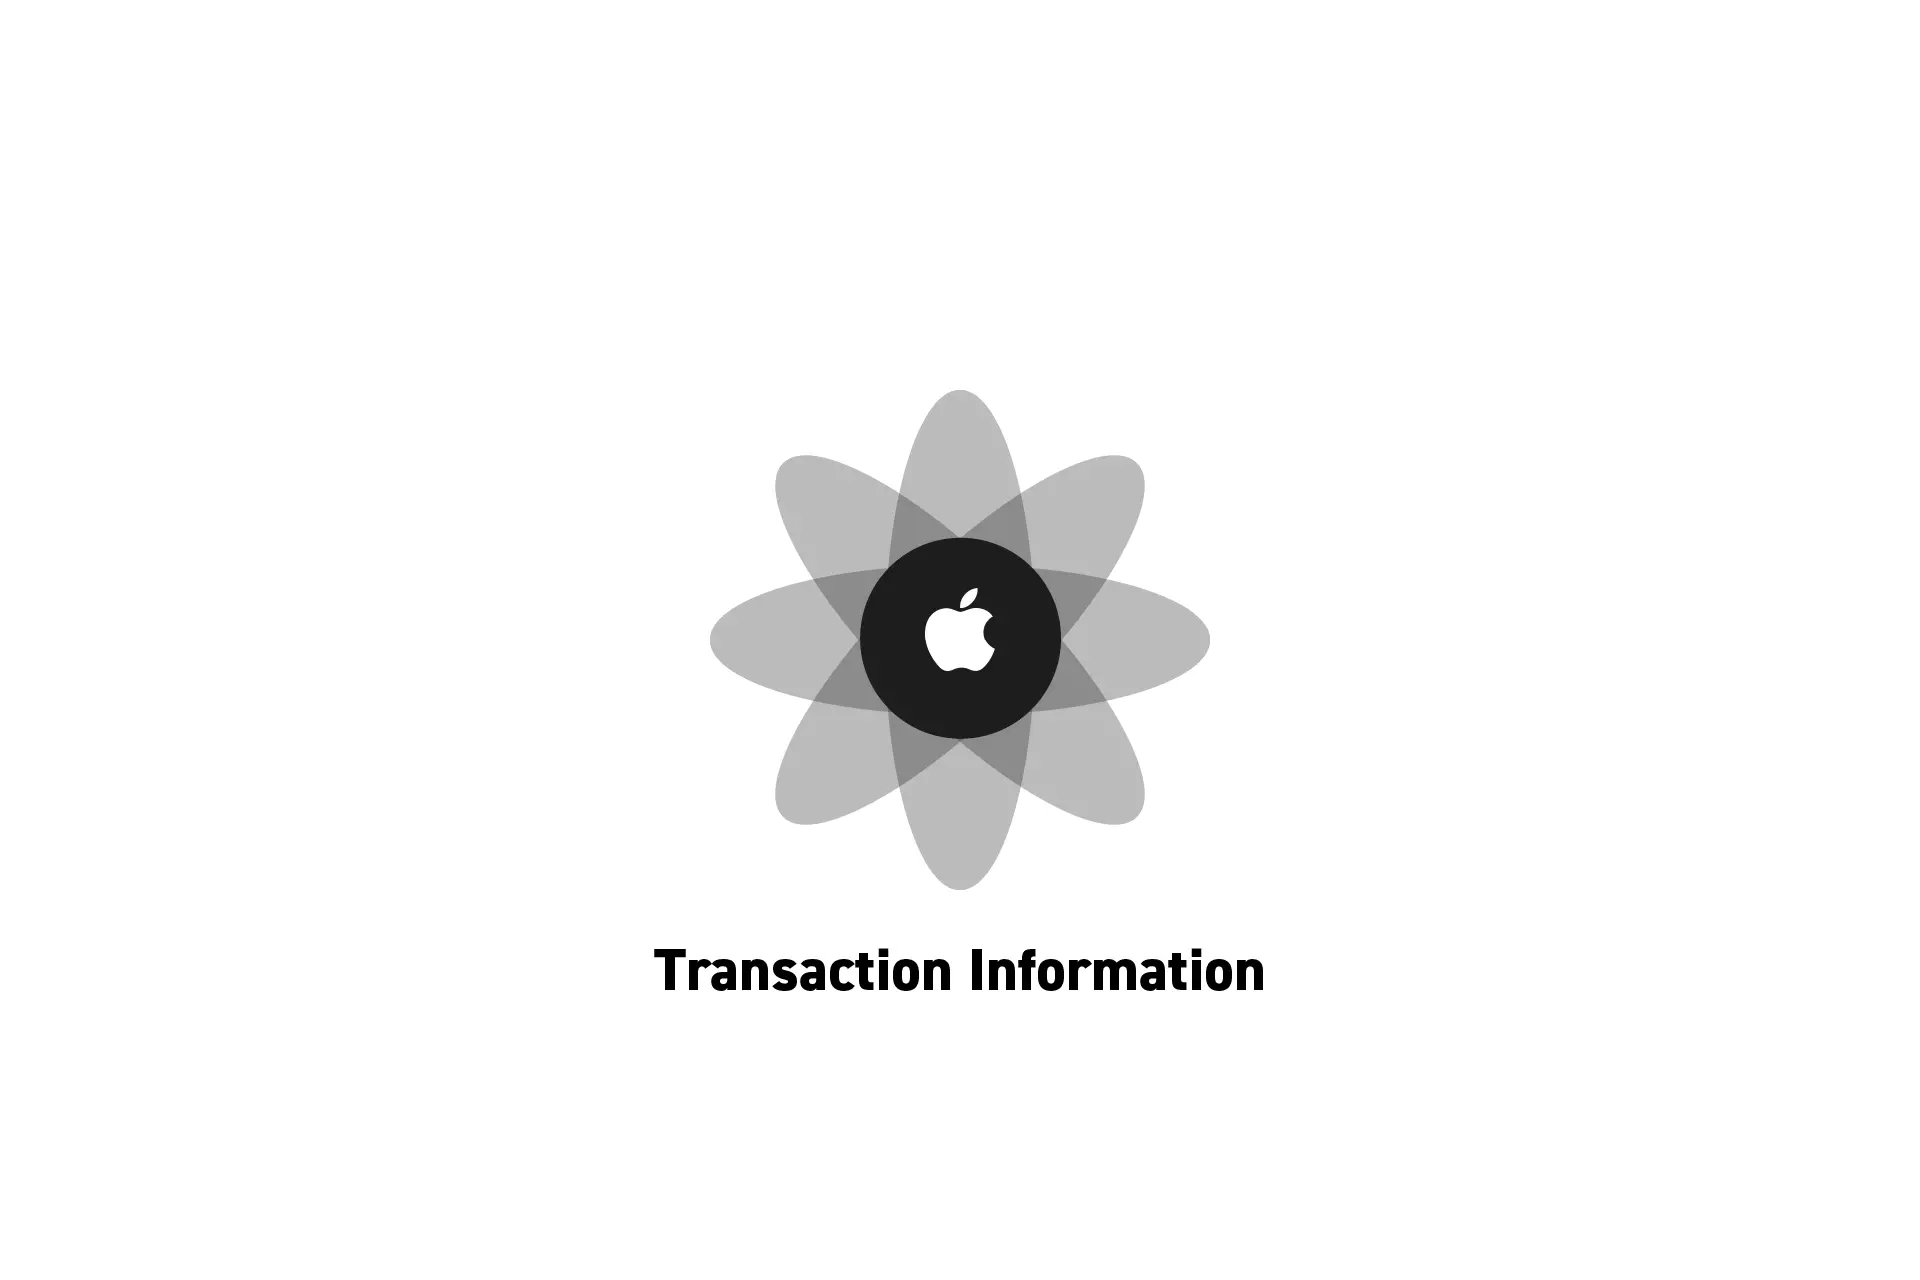 A flower that represents Apple with the text "Transaction Information" beneath it.